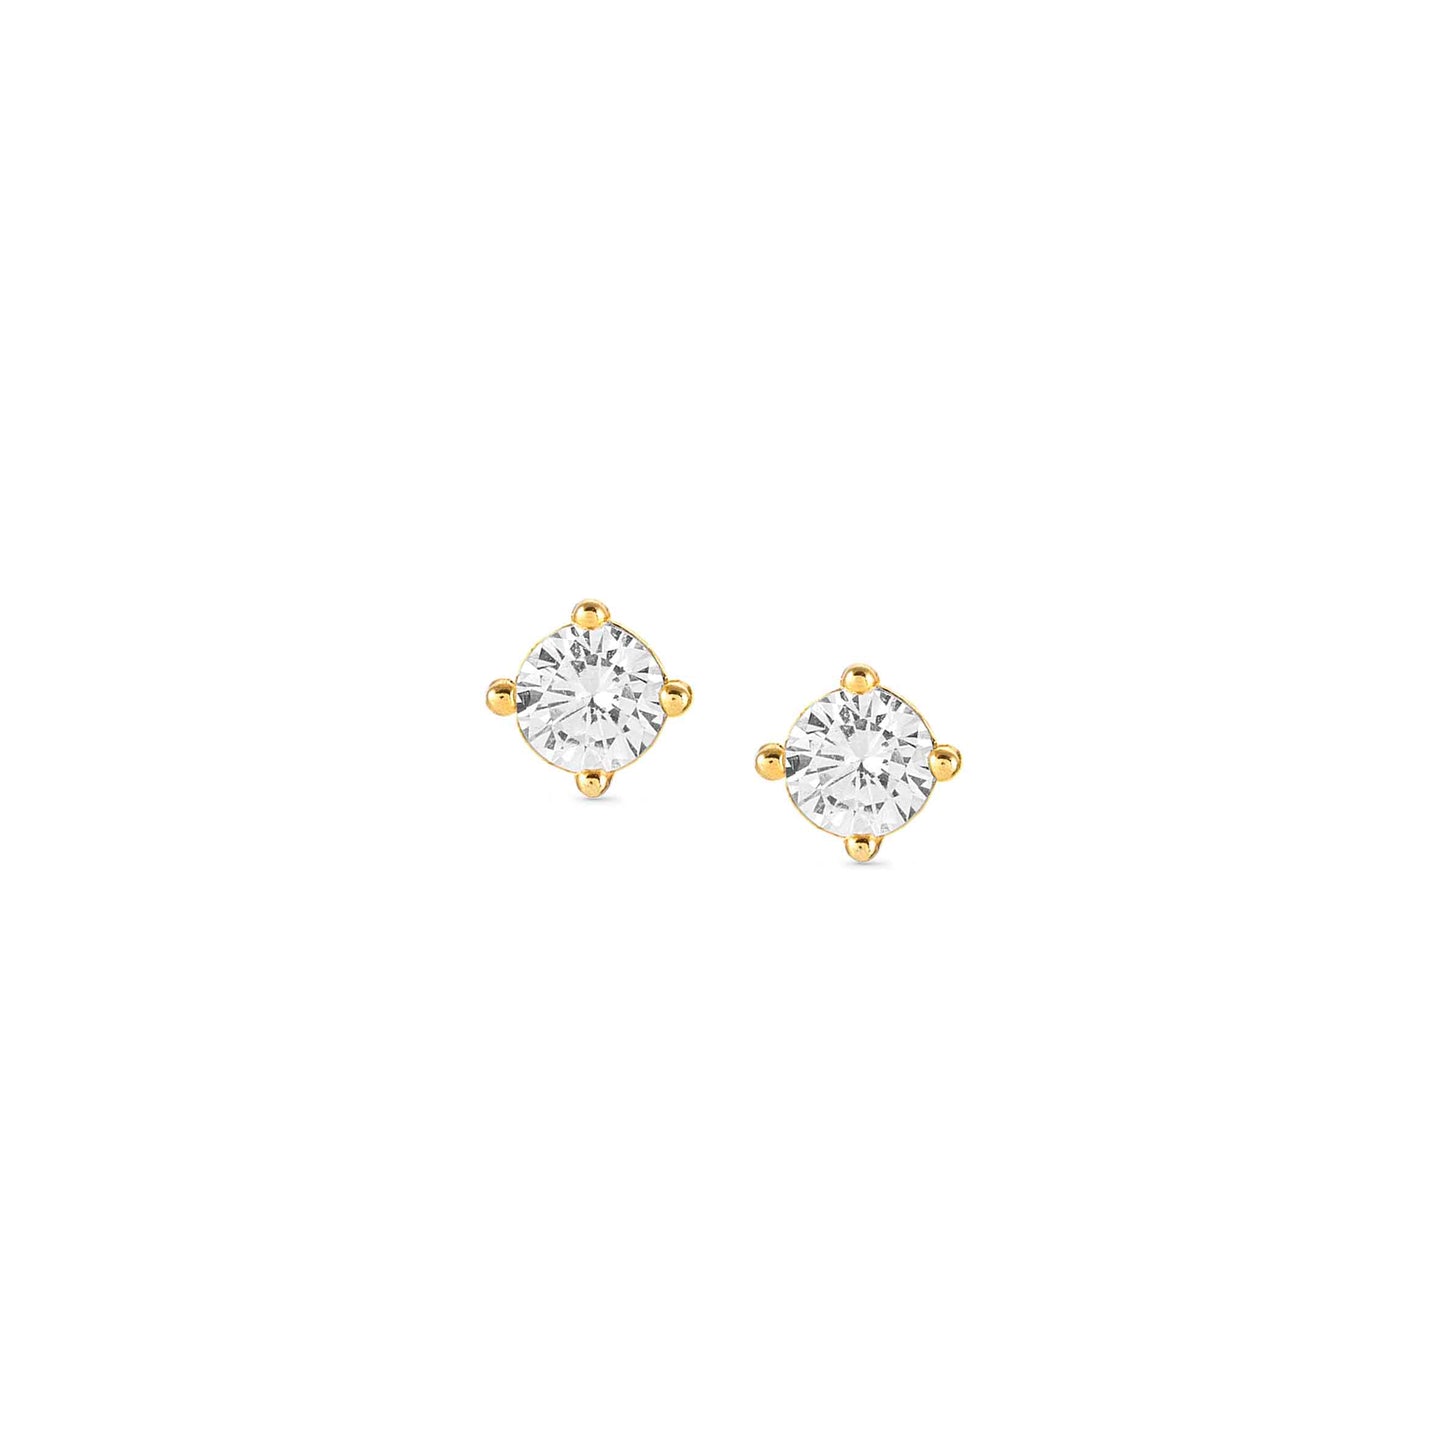 149205/016 Sentimental Silver and 24ct Yellow Gold Plated Stud earrings with Round CZ Stones.